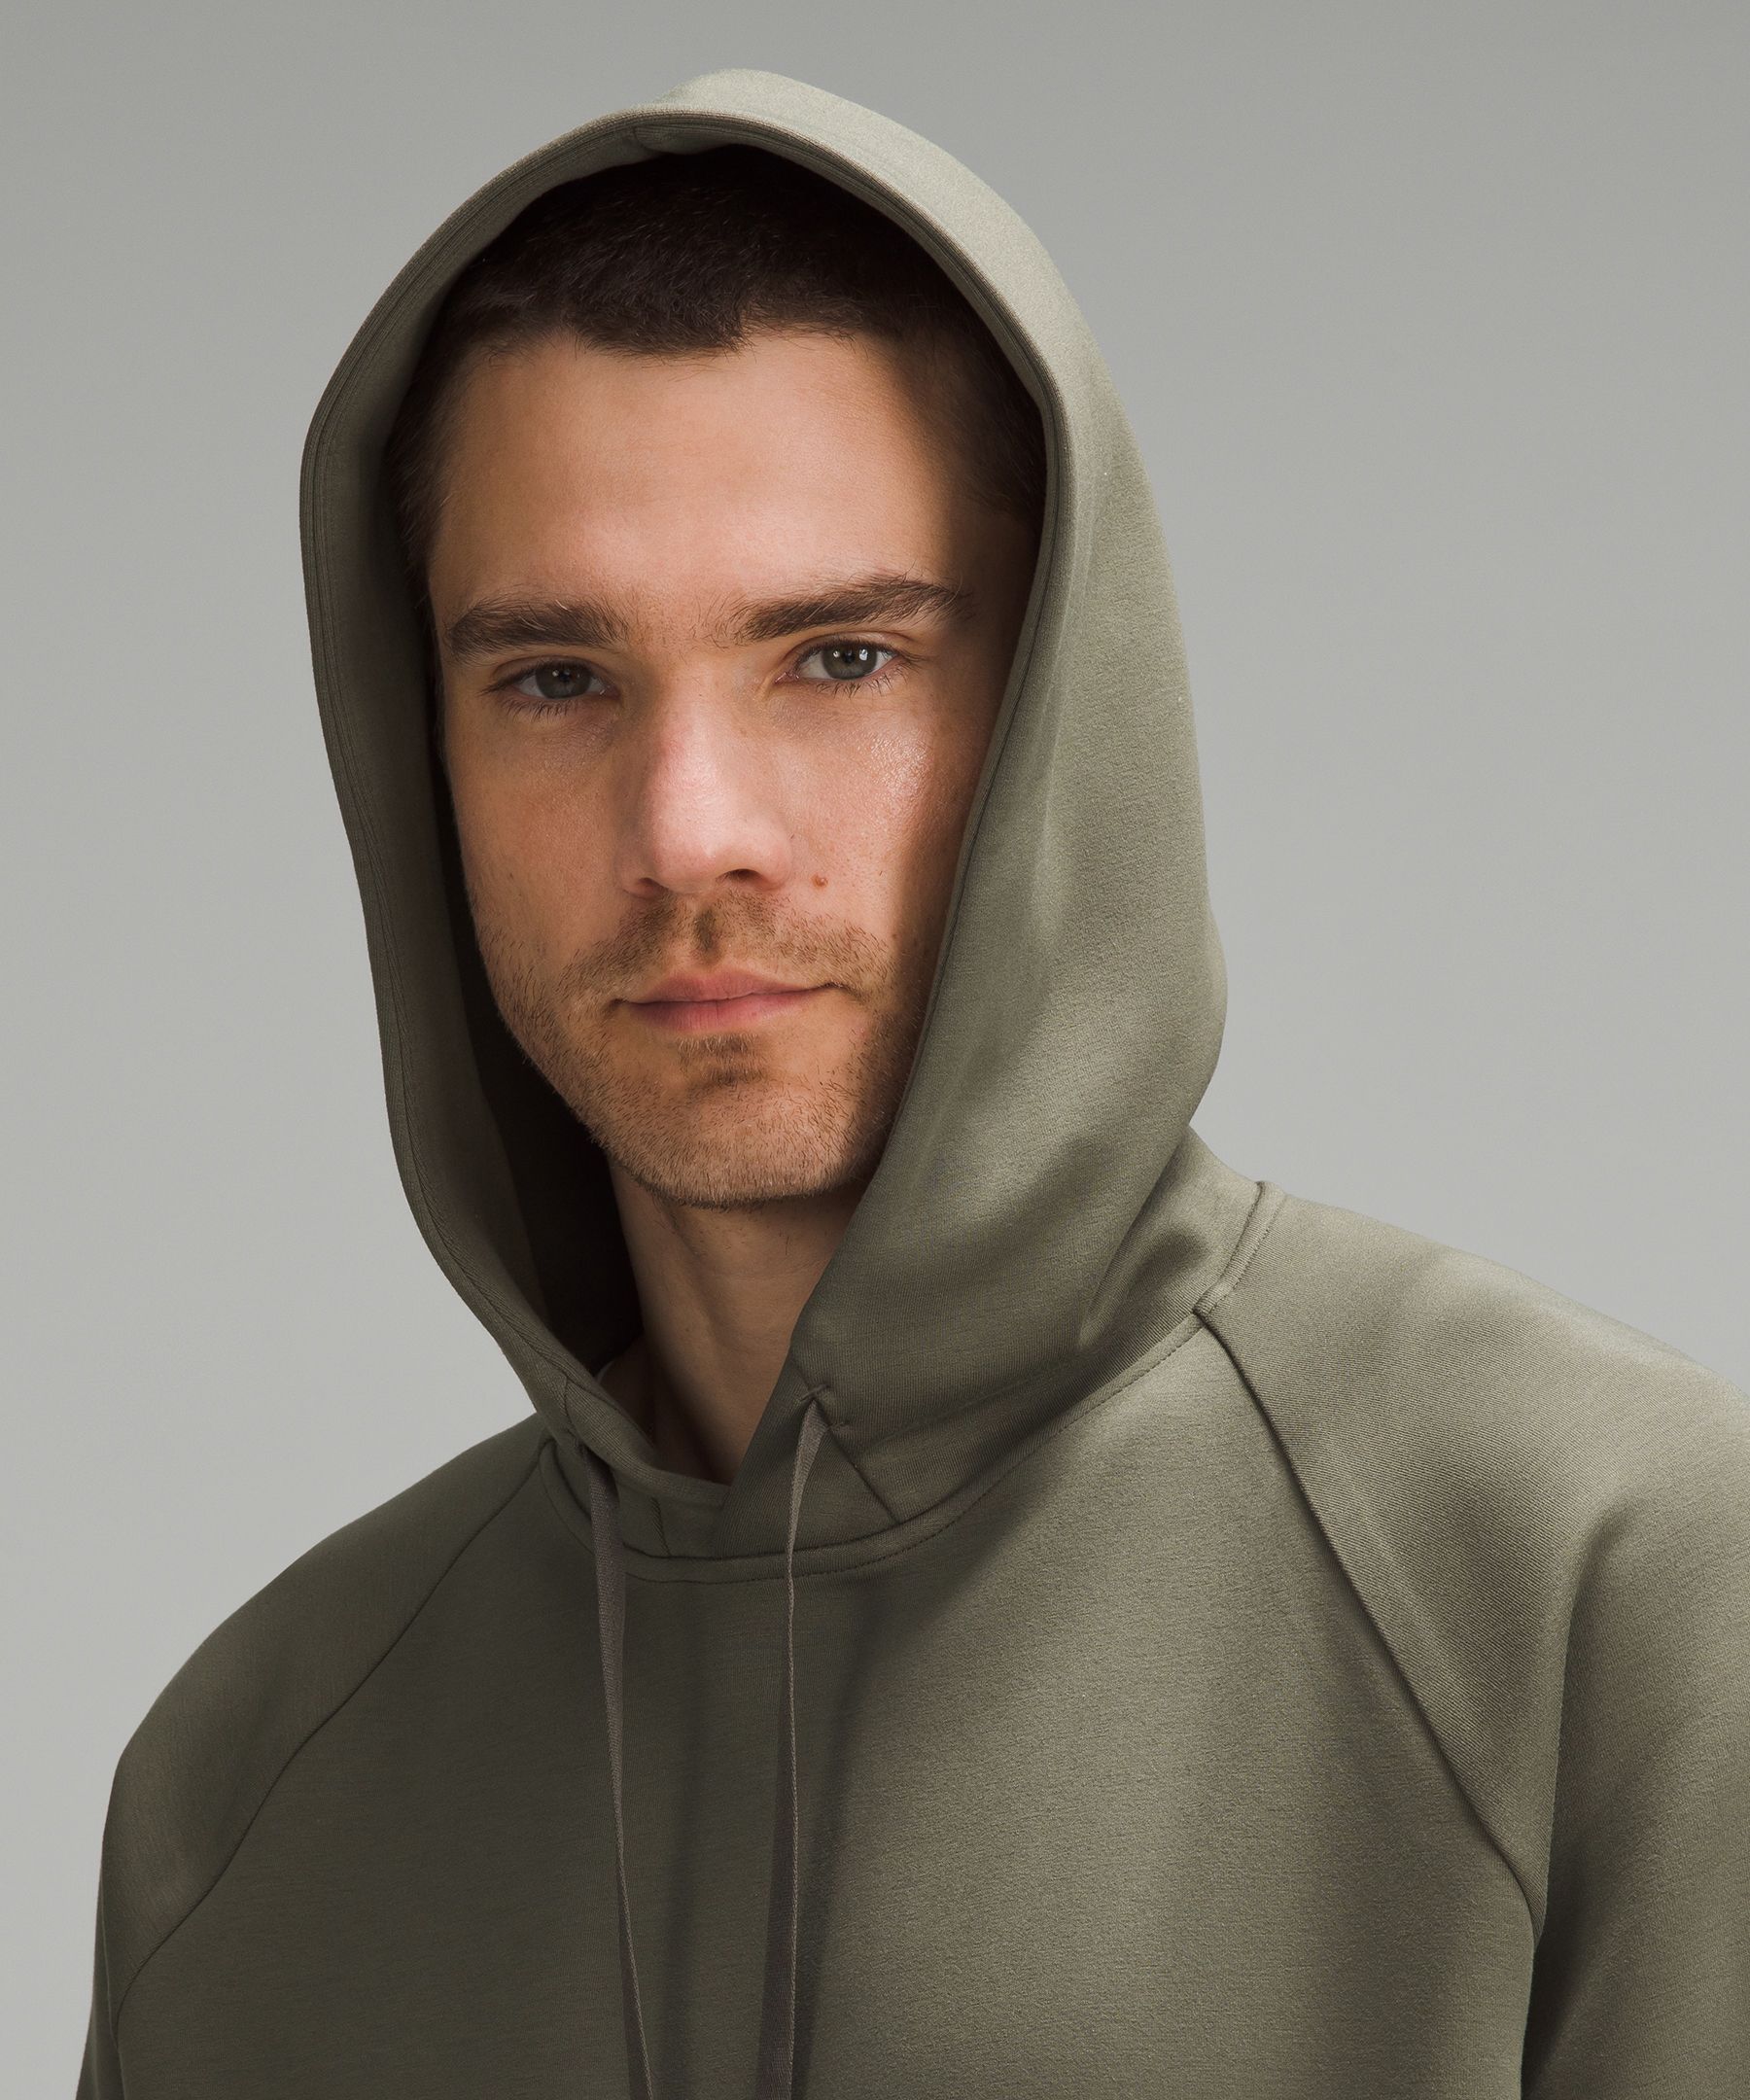 Shop Lululemon Smooth Spacer Classic-fit Pullover Hoodie